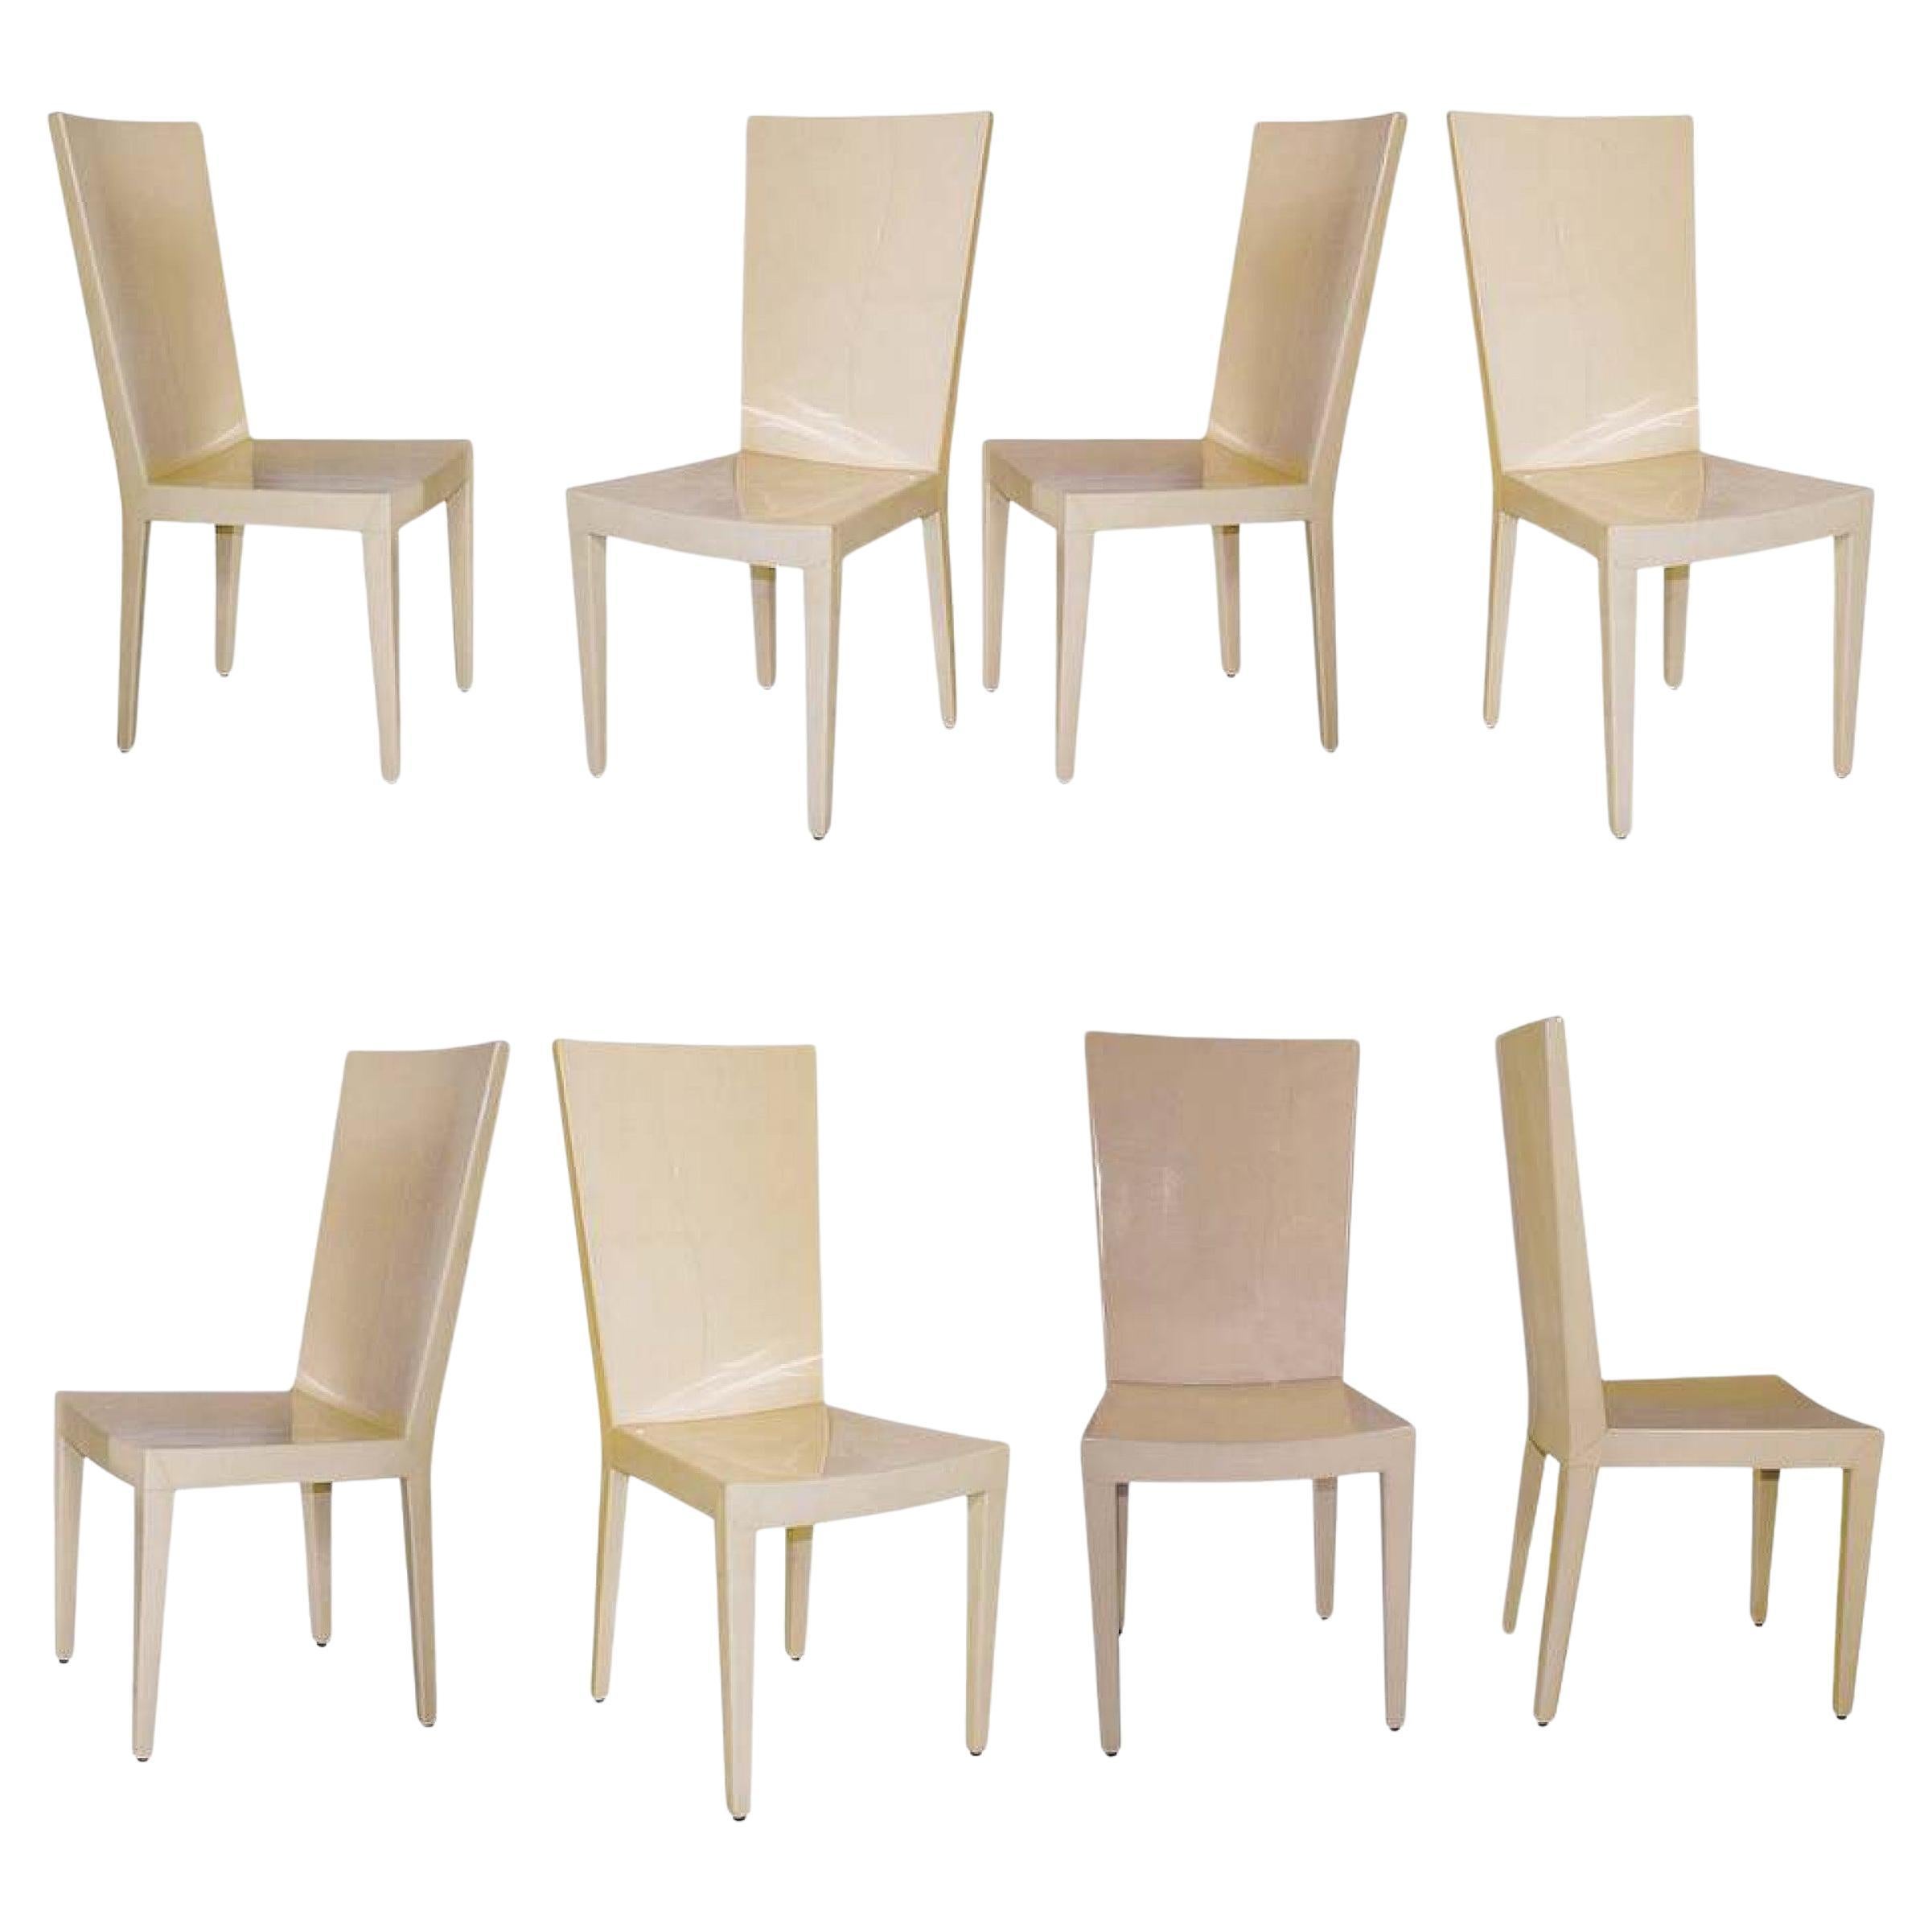 Karl Springer Mid-Century Modern Lacquered Beige Parchment Side / Dining Chairs